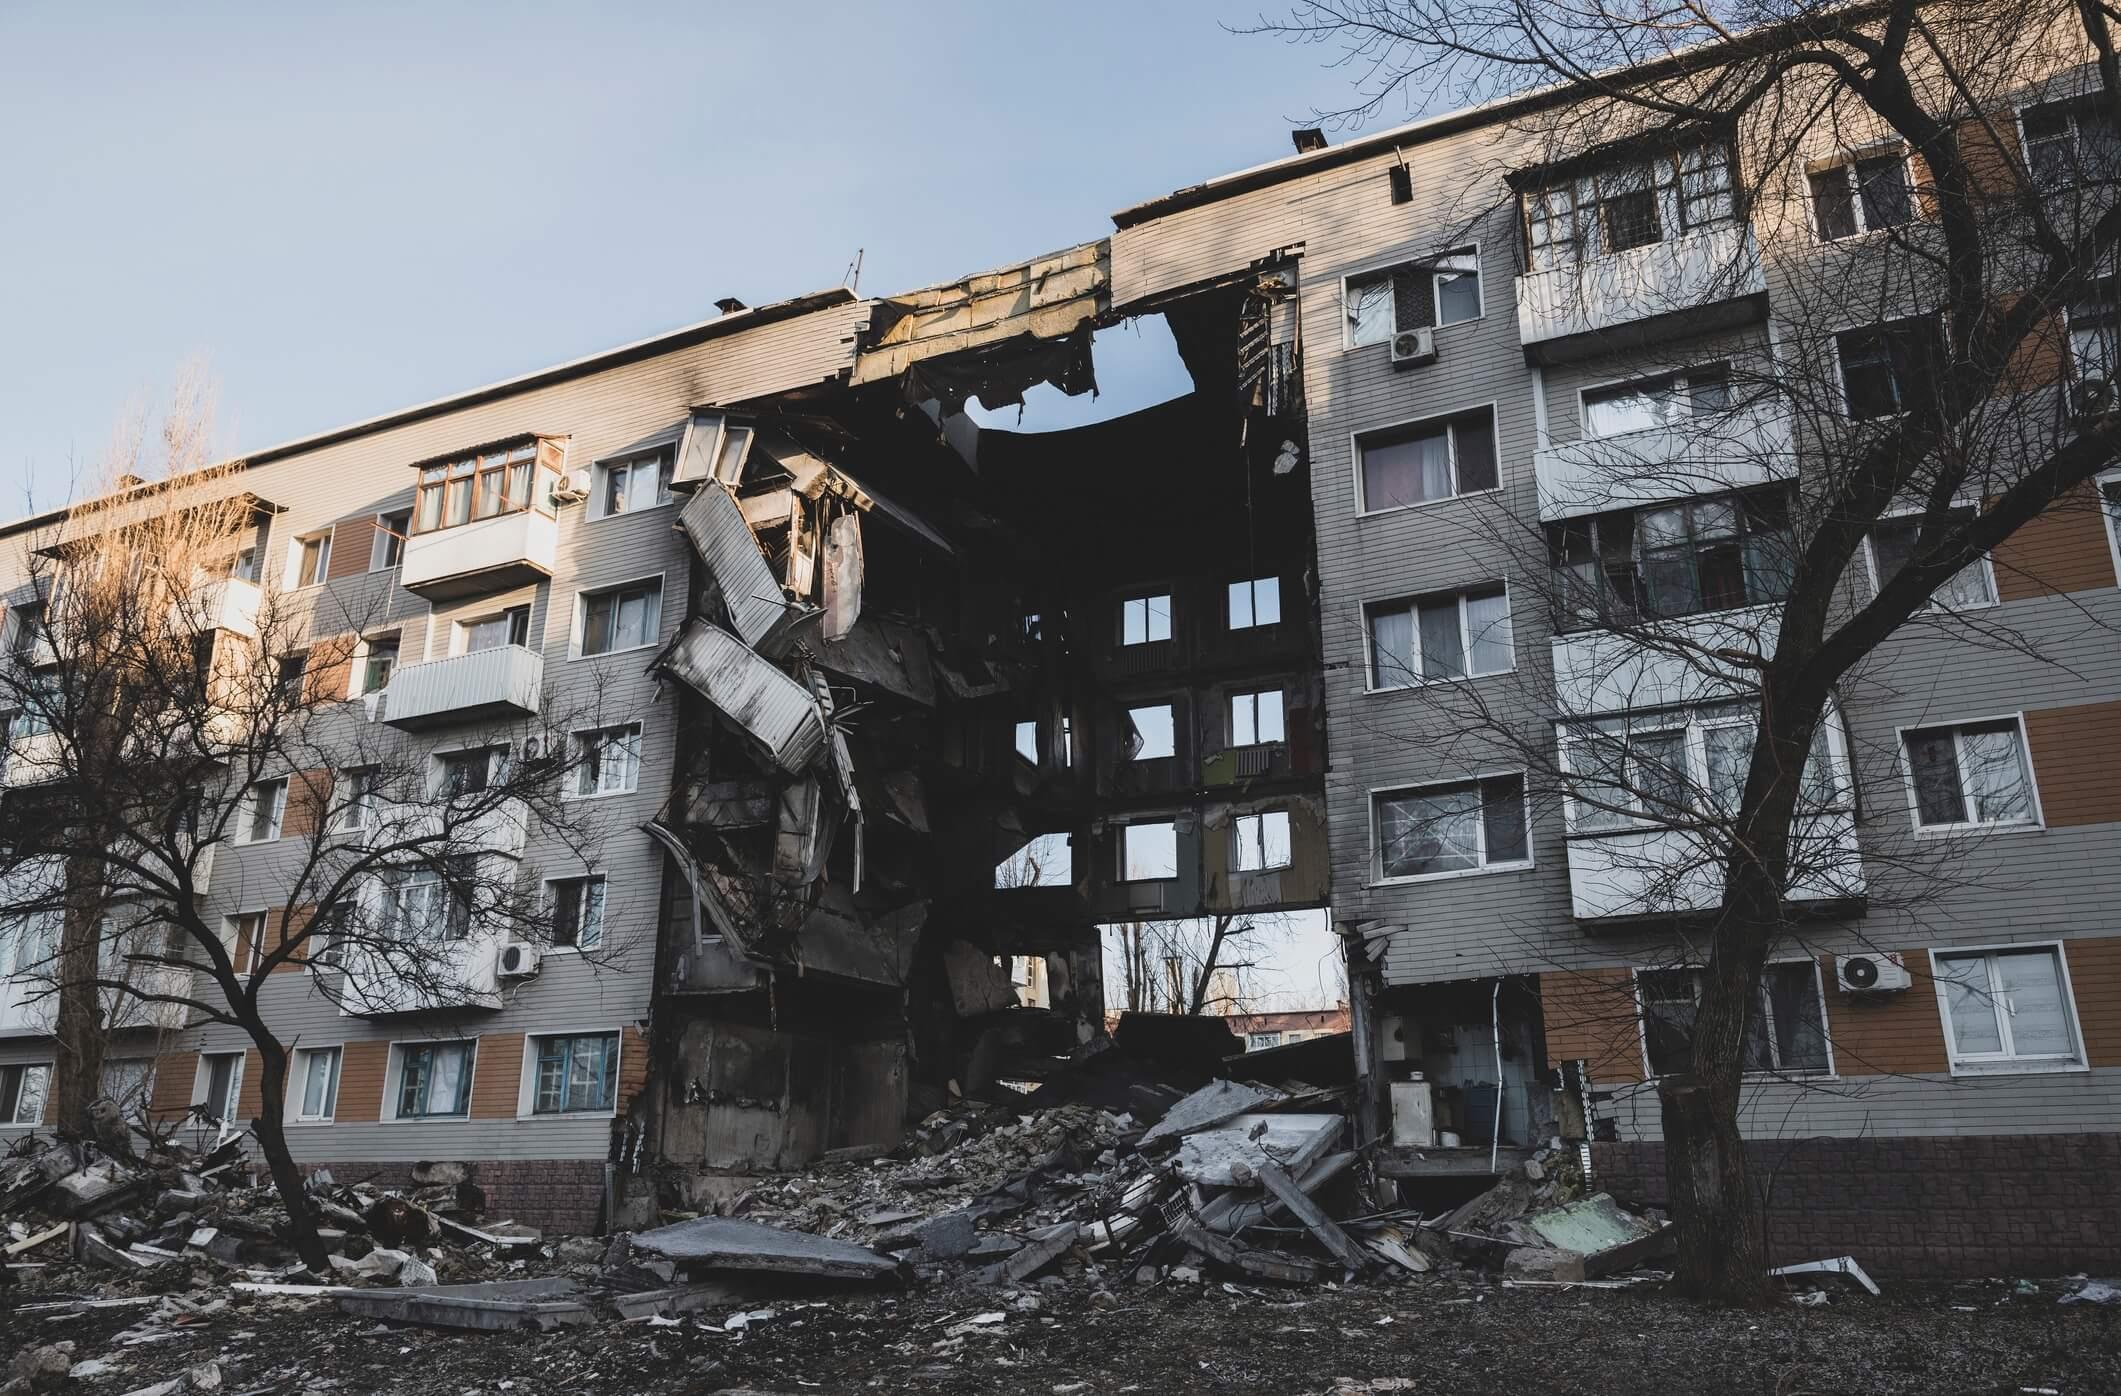 Role of the Council of Europe in Shaping Accountability Mechanisms for War Crimes in Ukraine